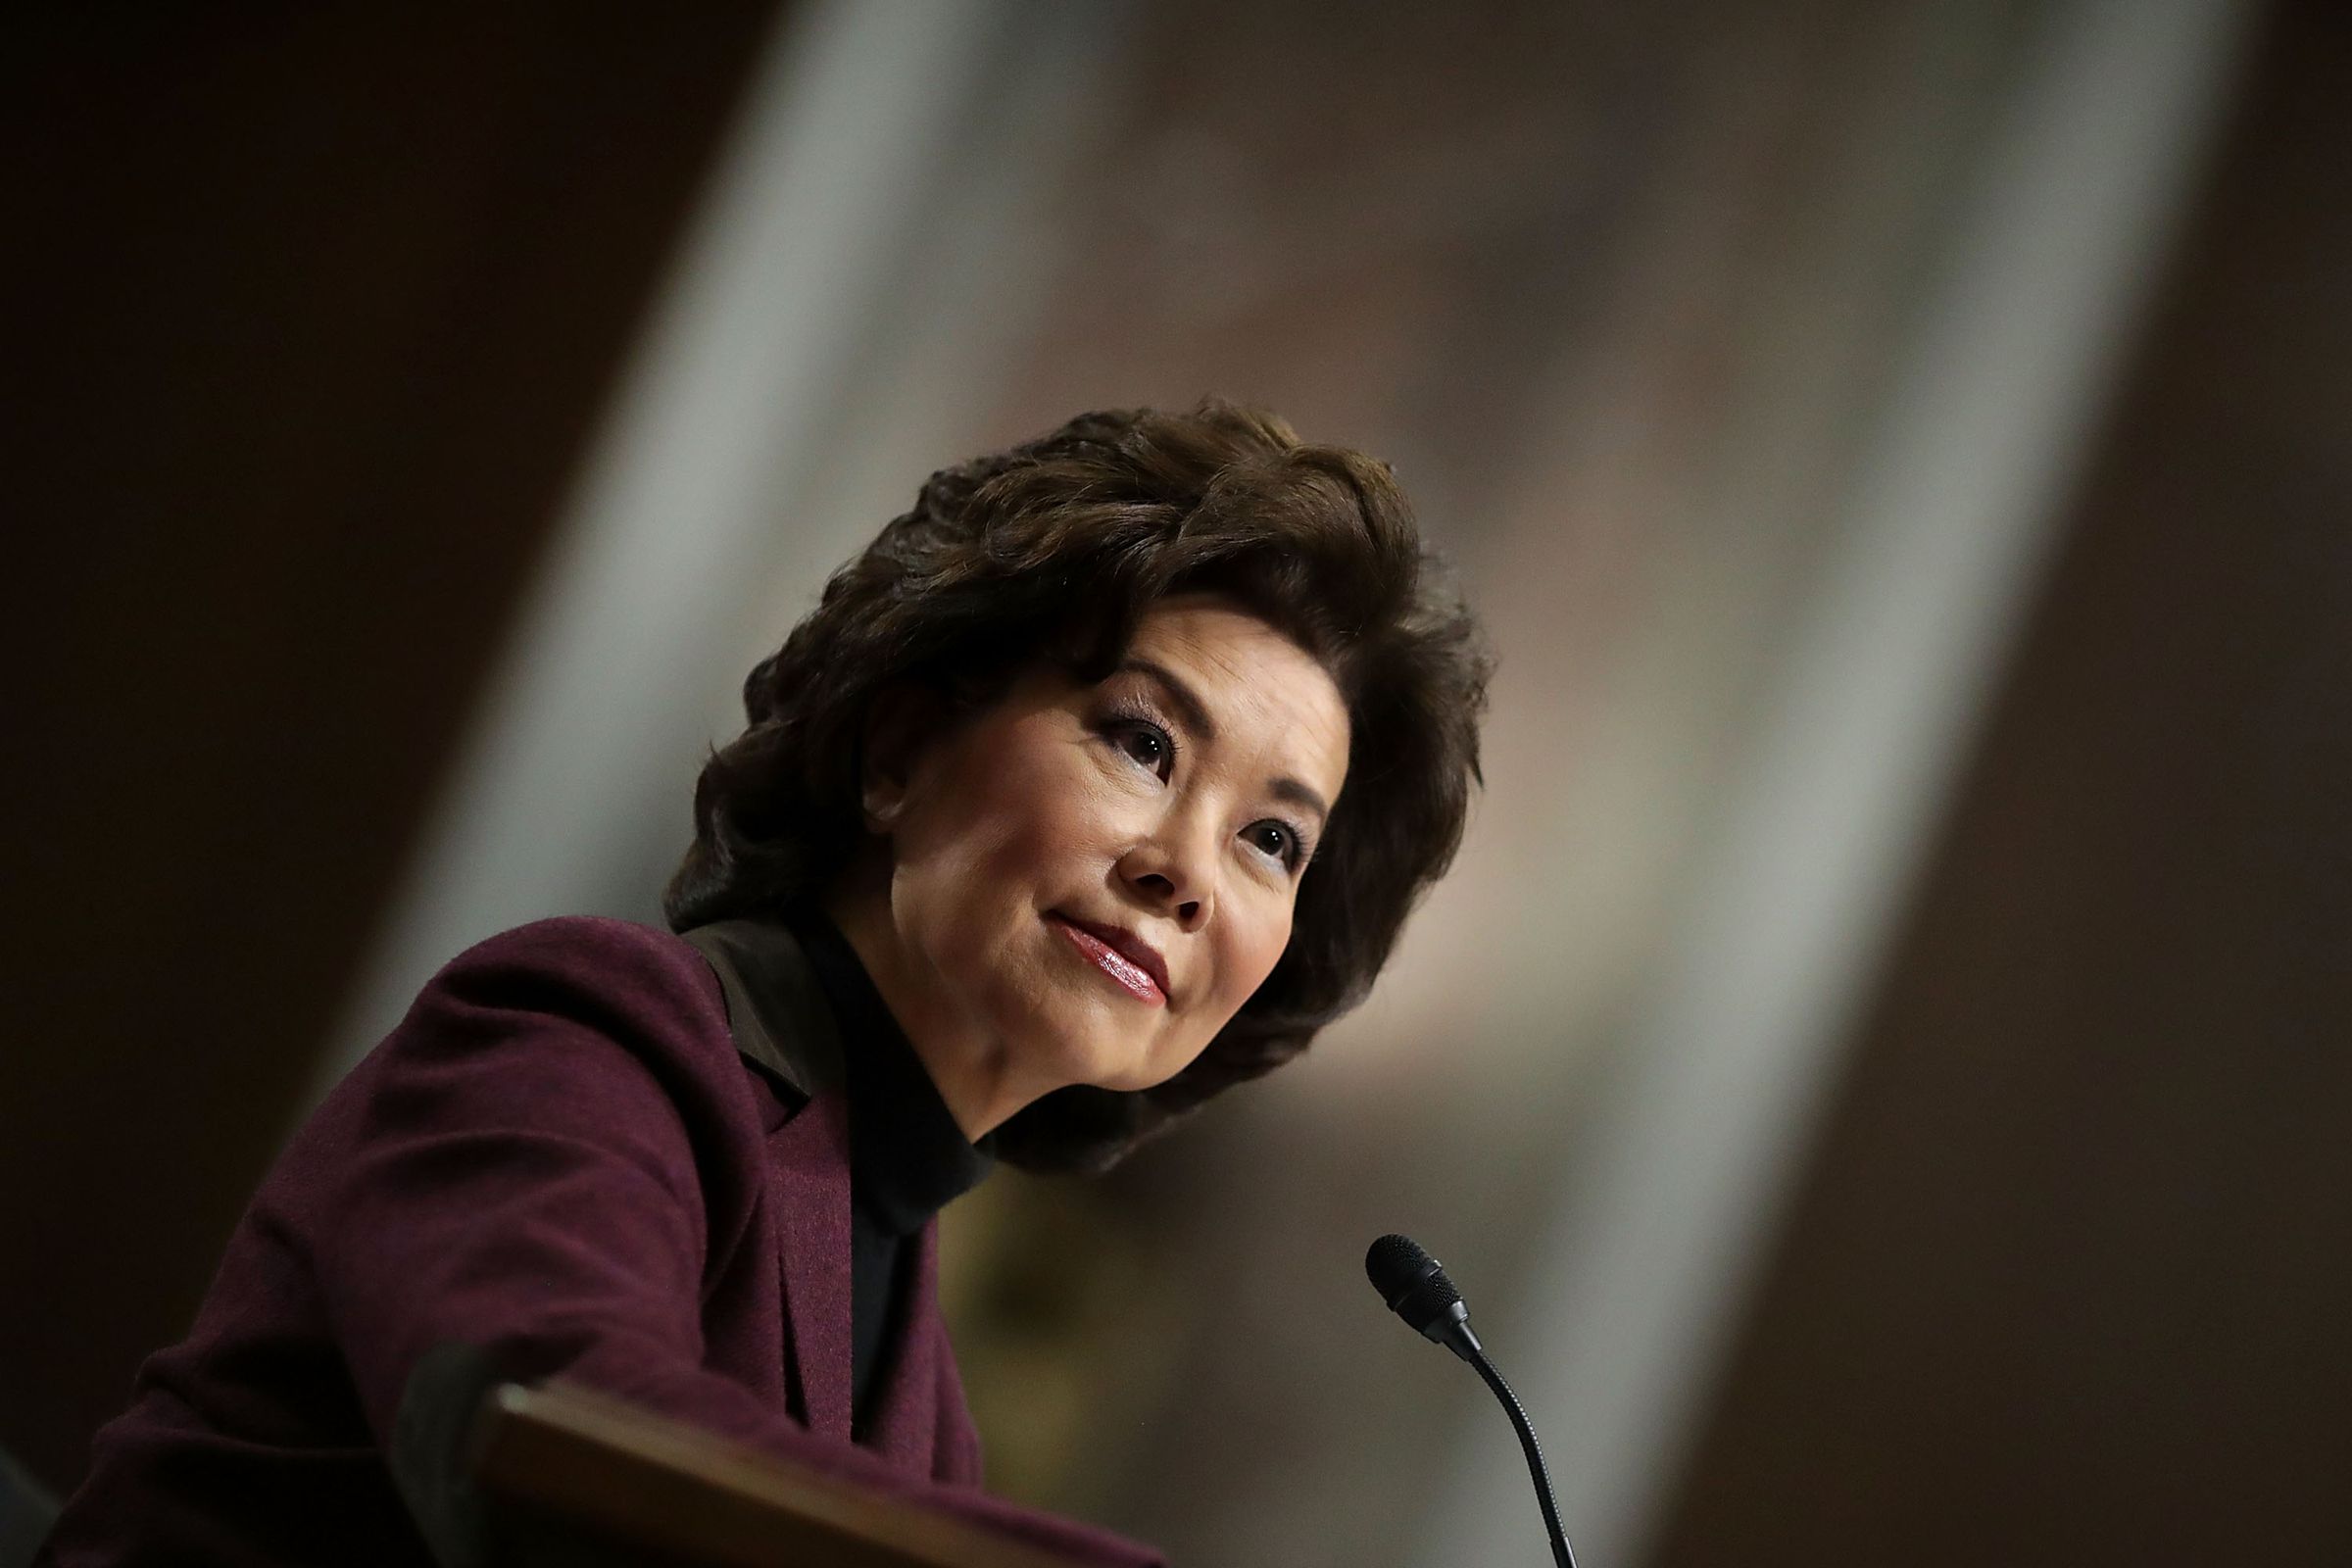 Senate Committee Holds Confirmation Hearing For Trump's Pick To Be Transportation Secretary Elaine Chao